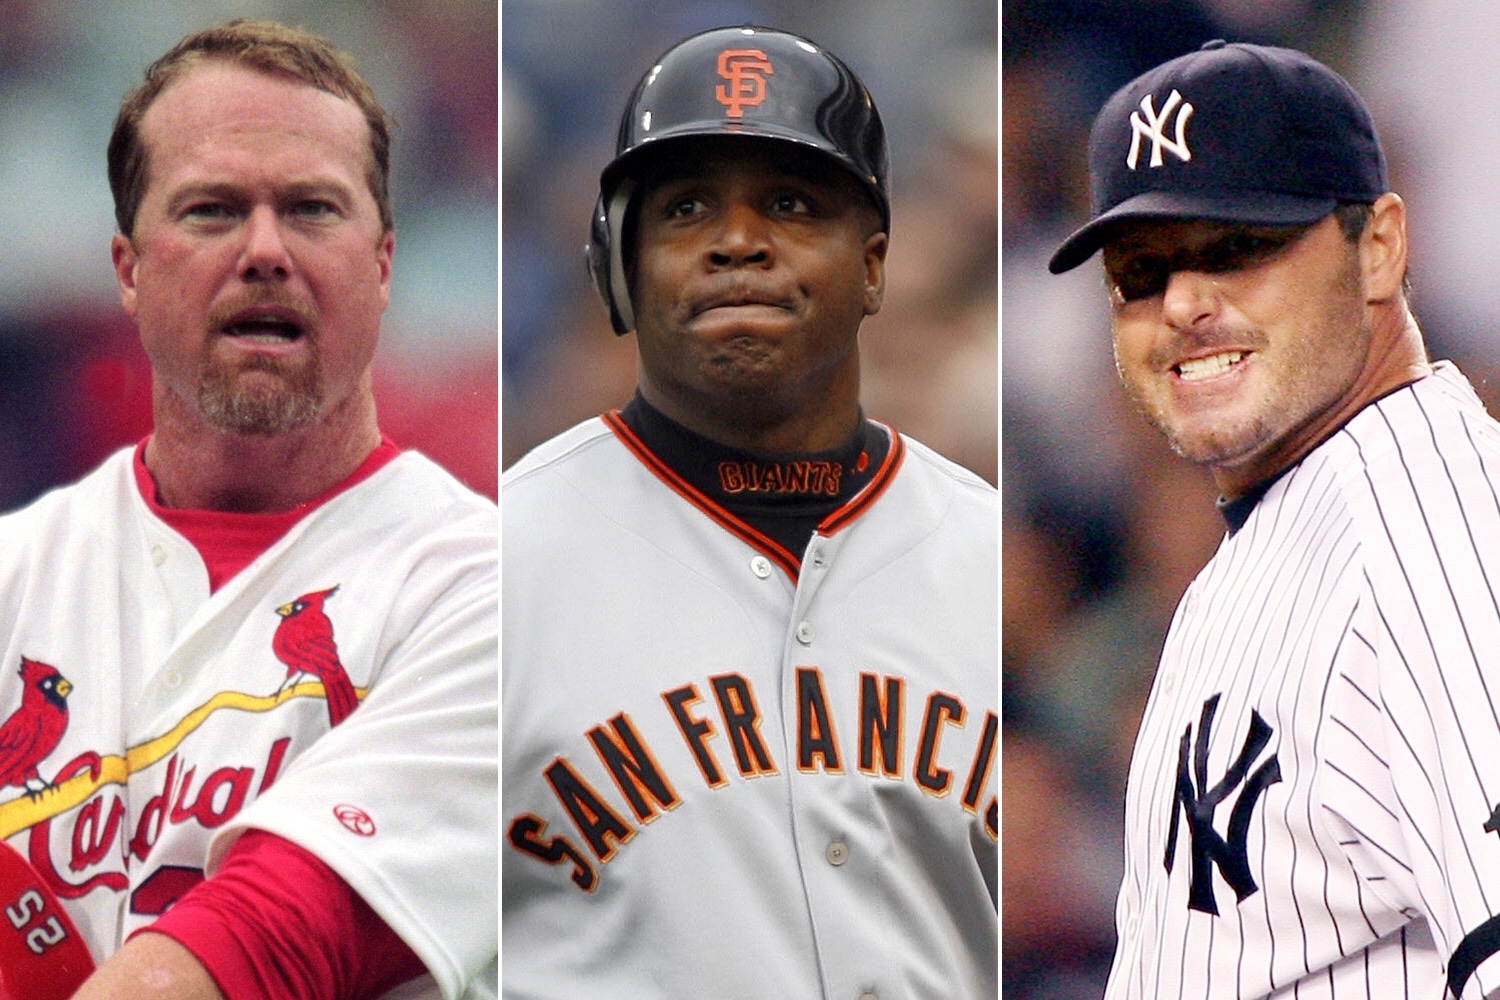 Can the Hall of Fame turn into the Hall of Shame?